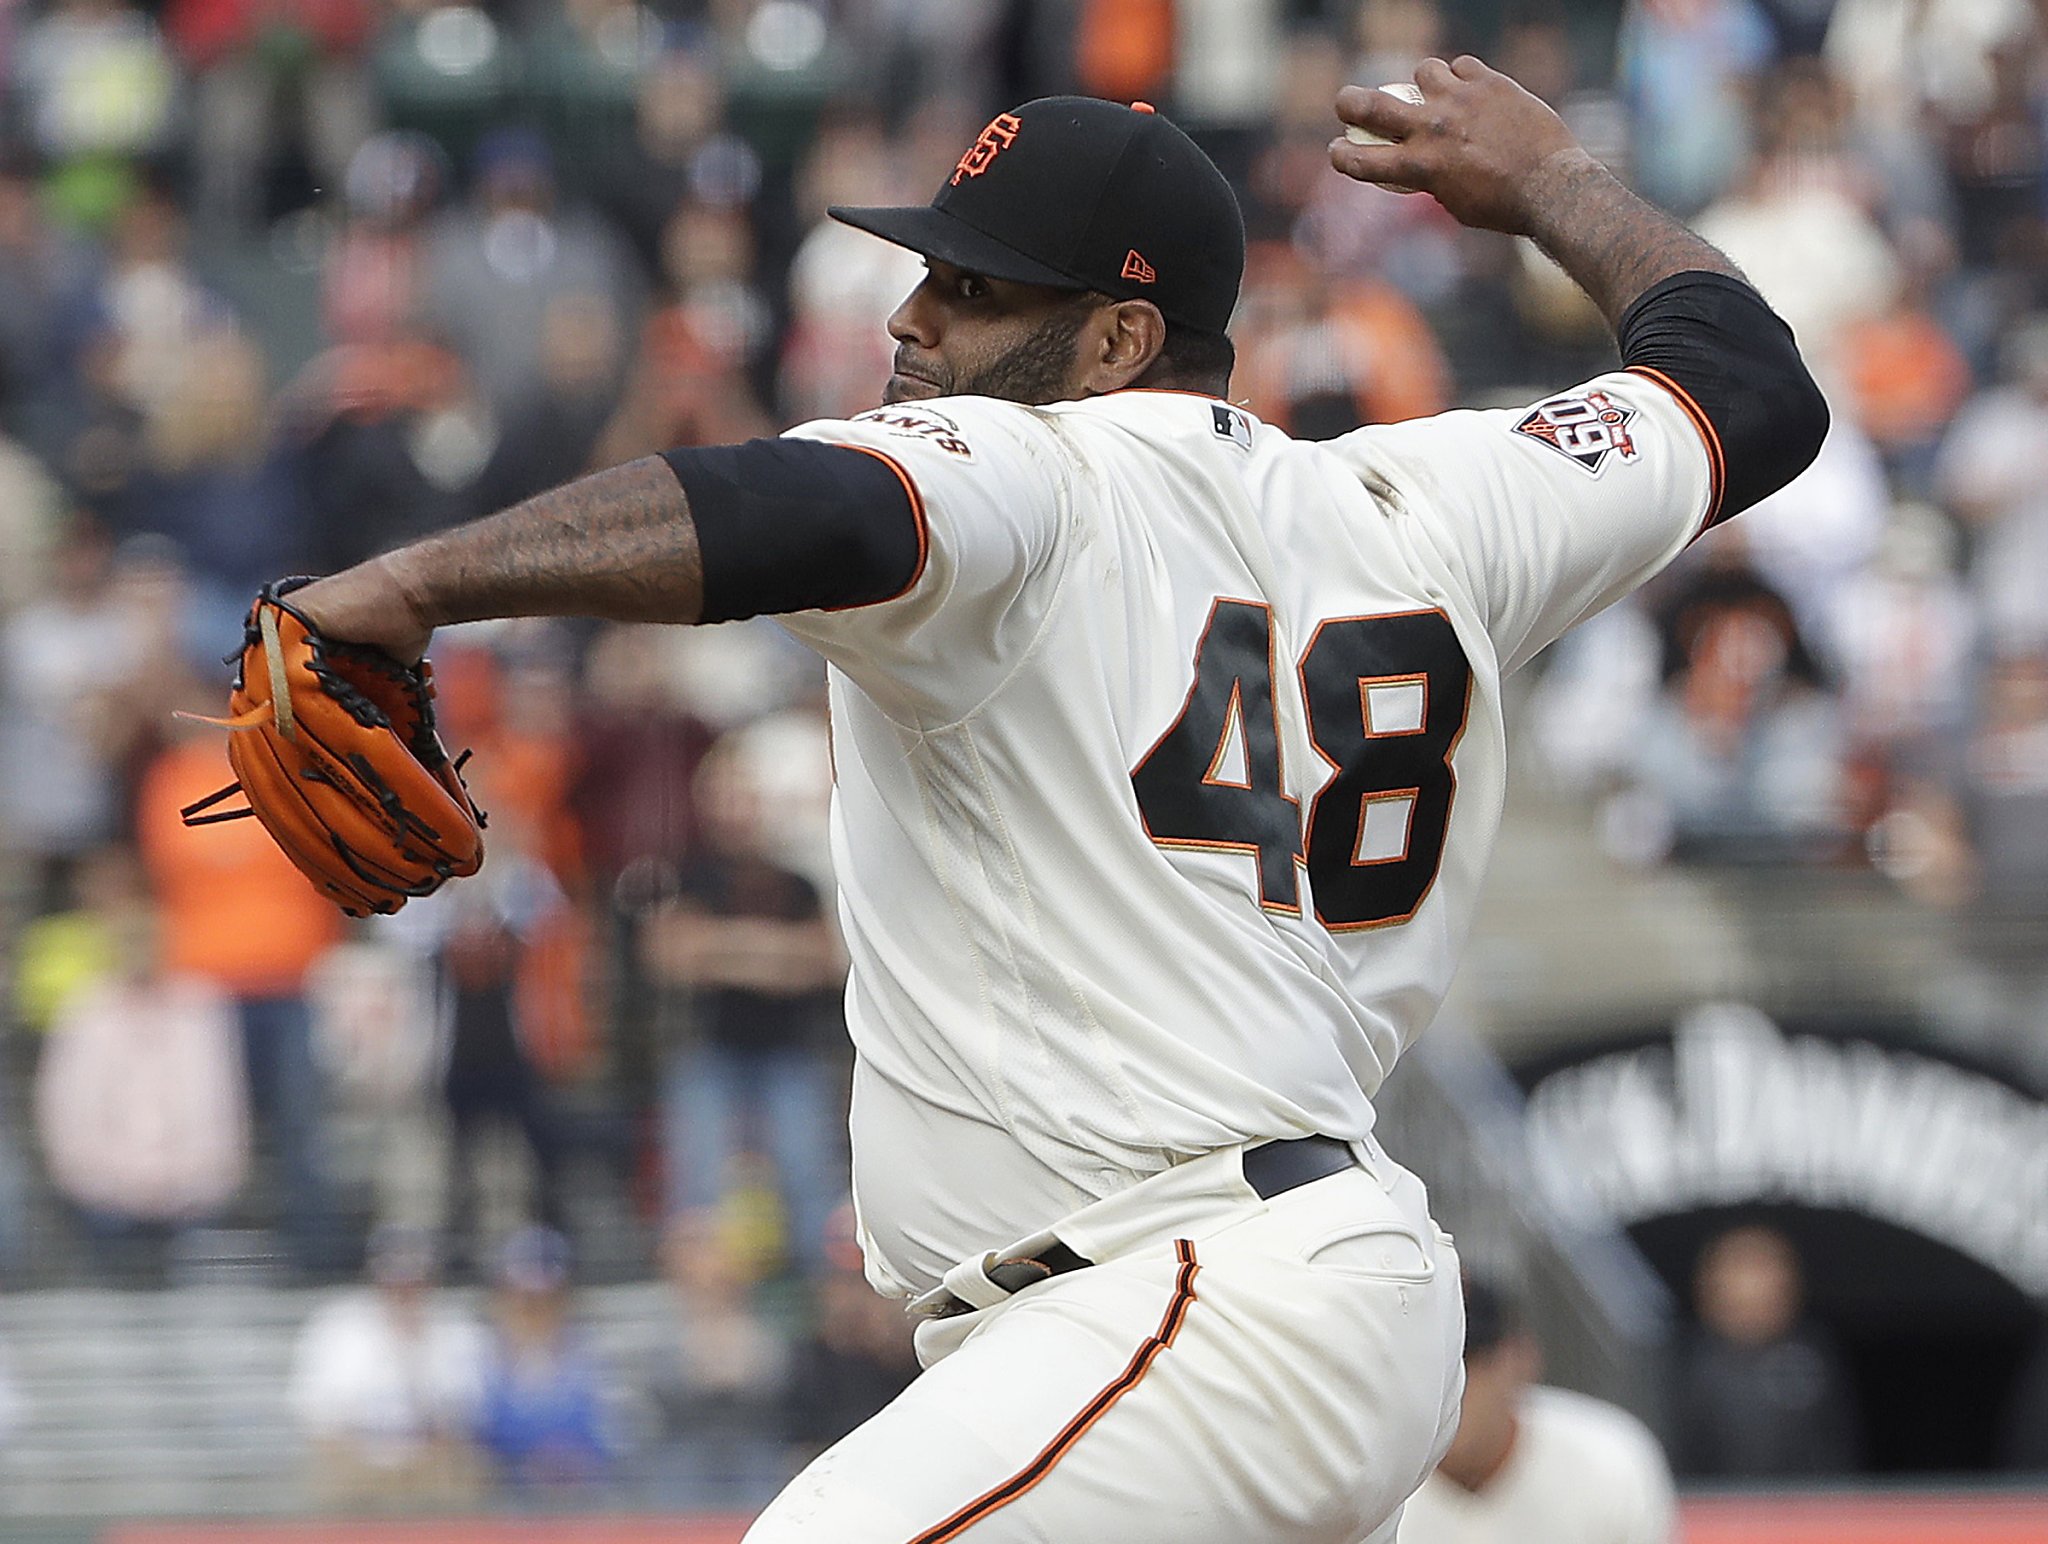 Giants' Pablo Sandoval tells Bruce Bochy he'd be glad to pitch again